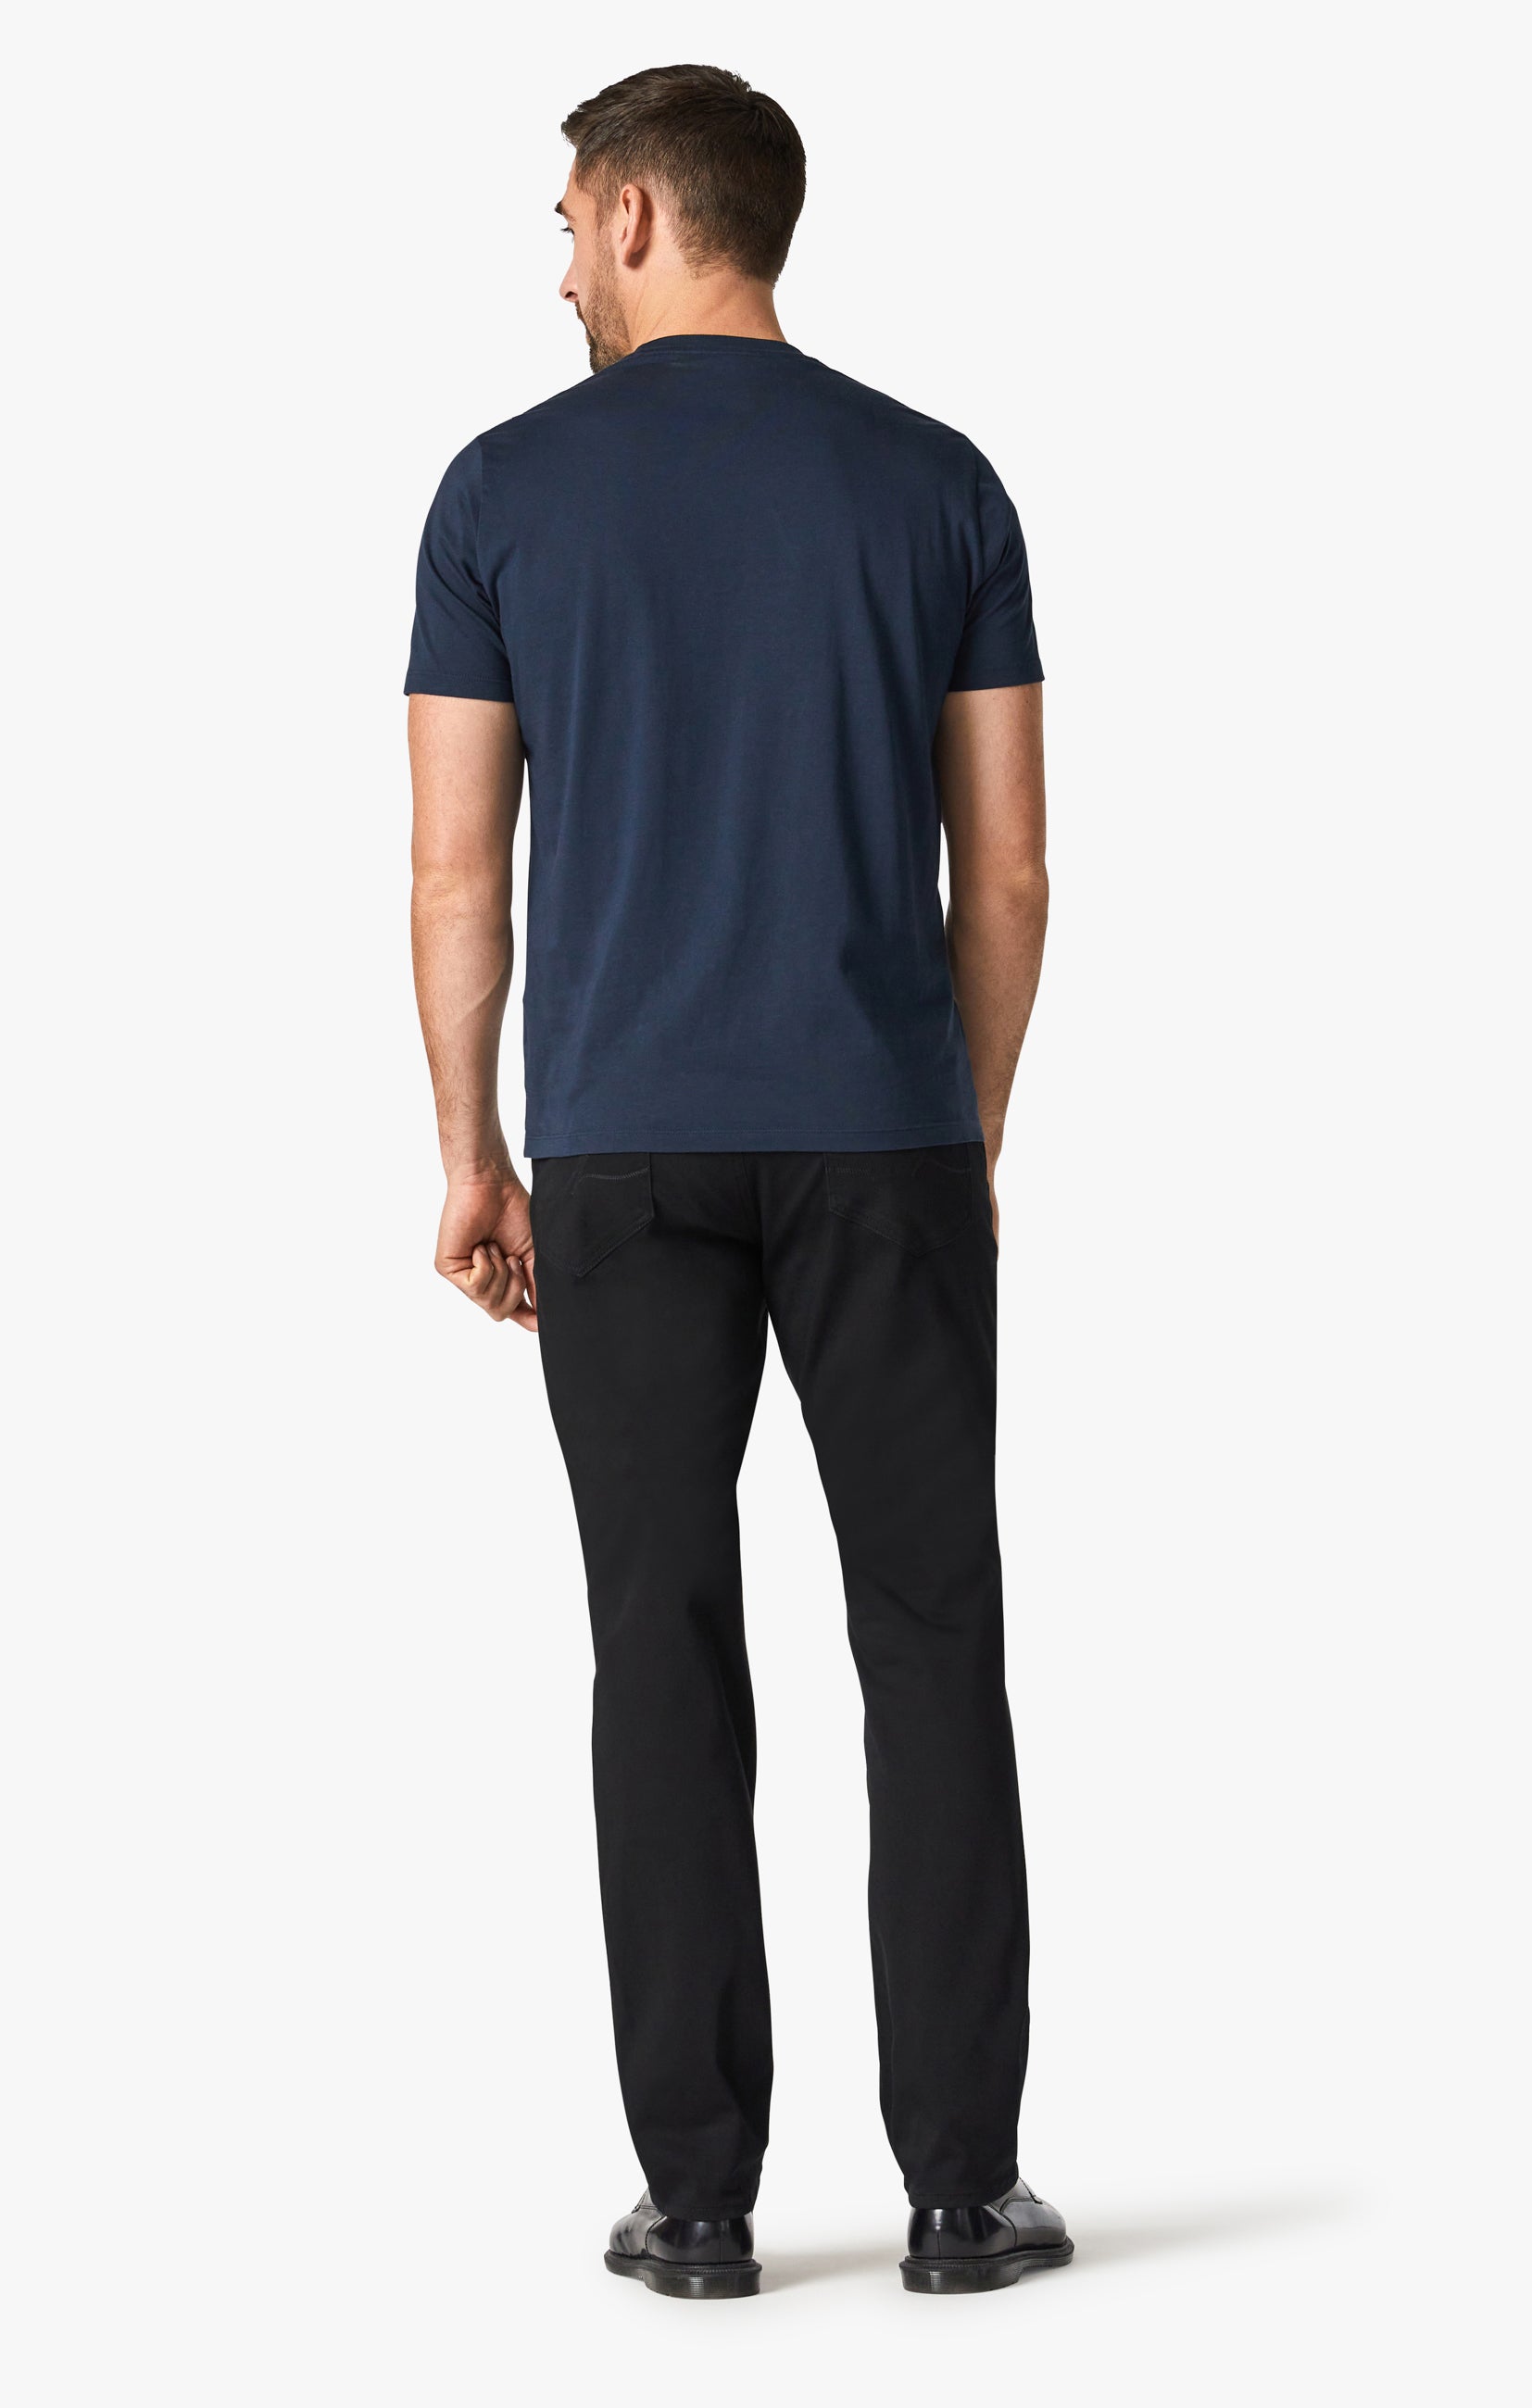 Charisma Classic Fit Jeans in Select Double Black Image 4